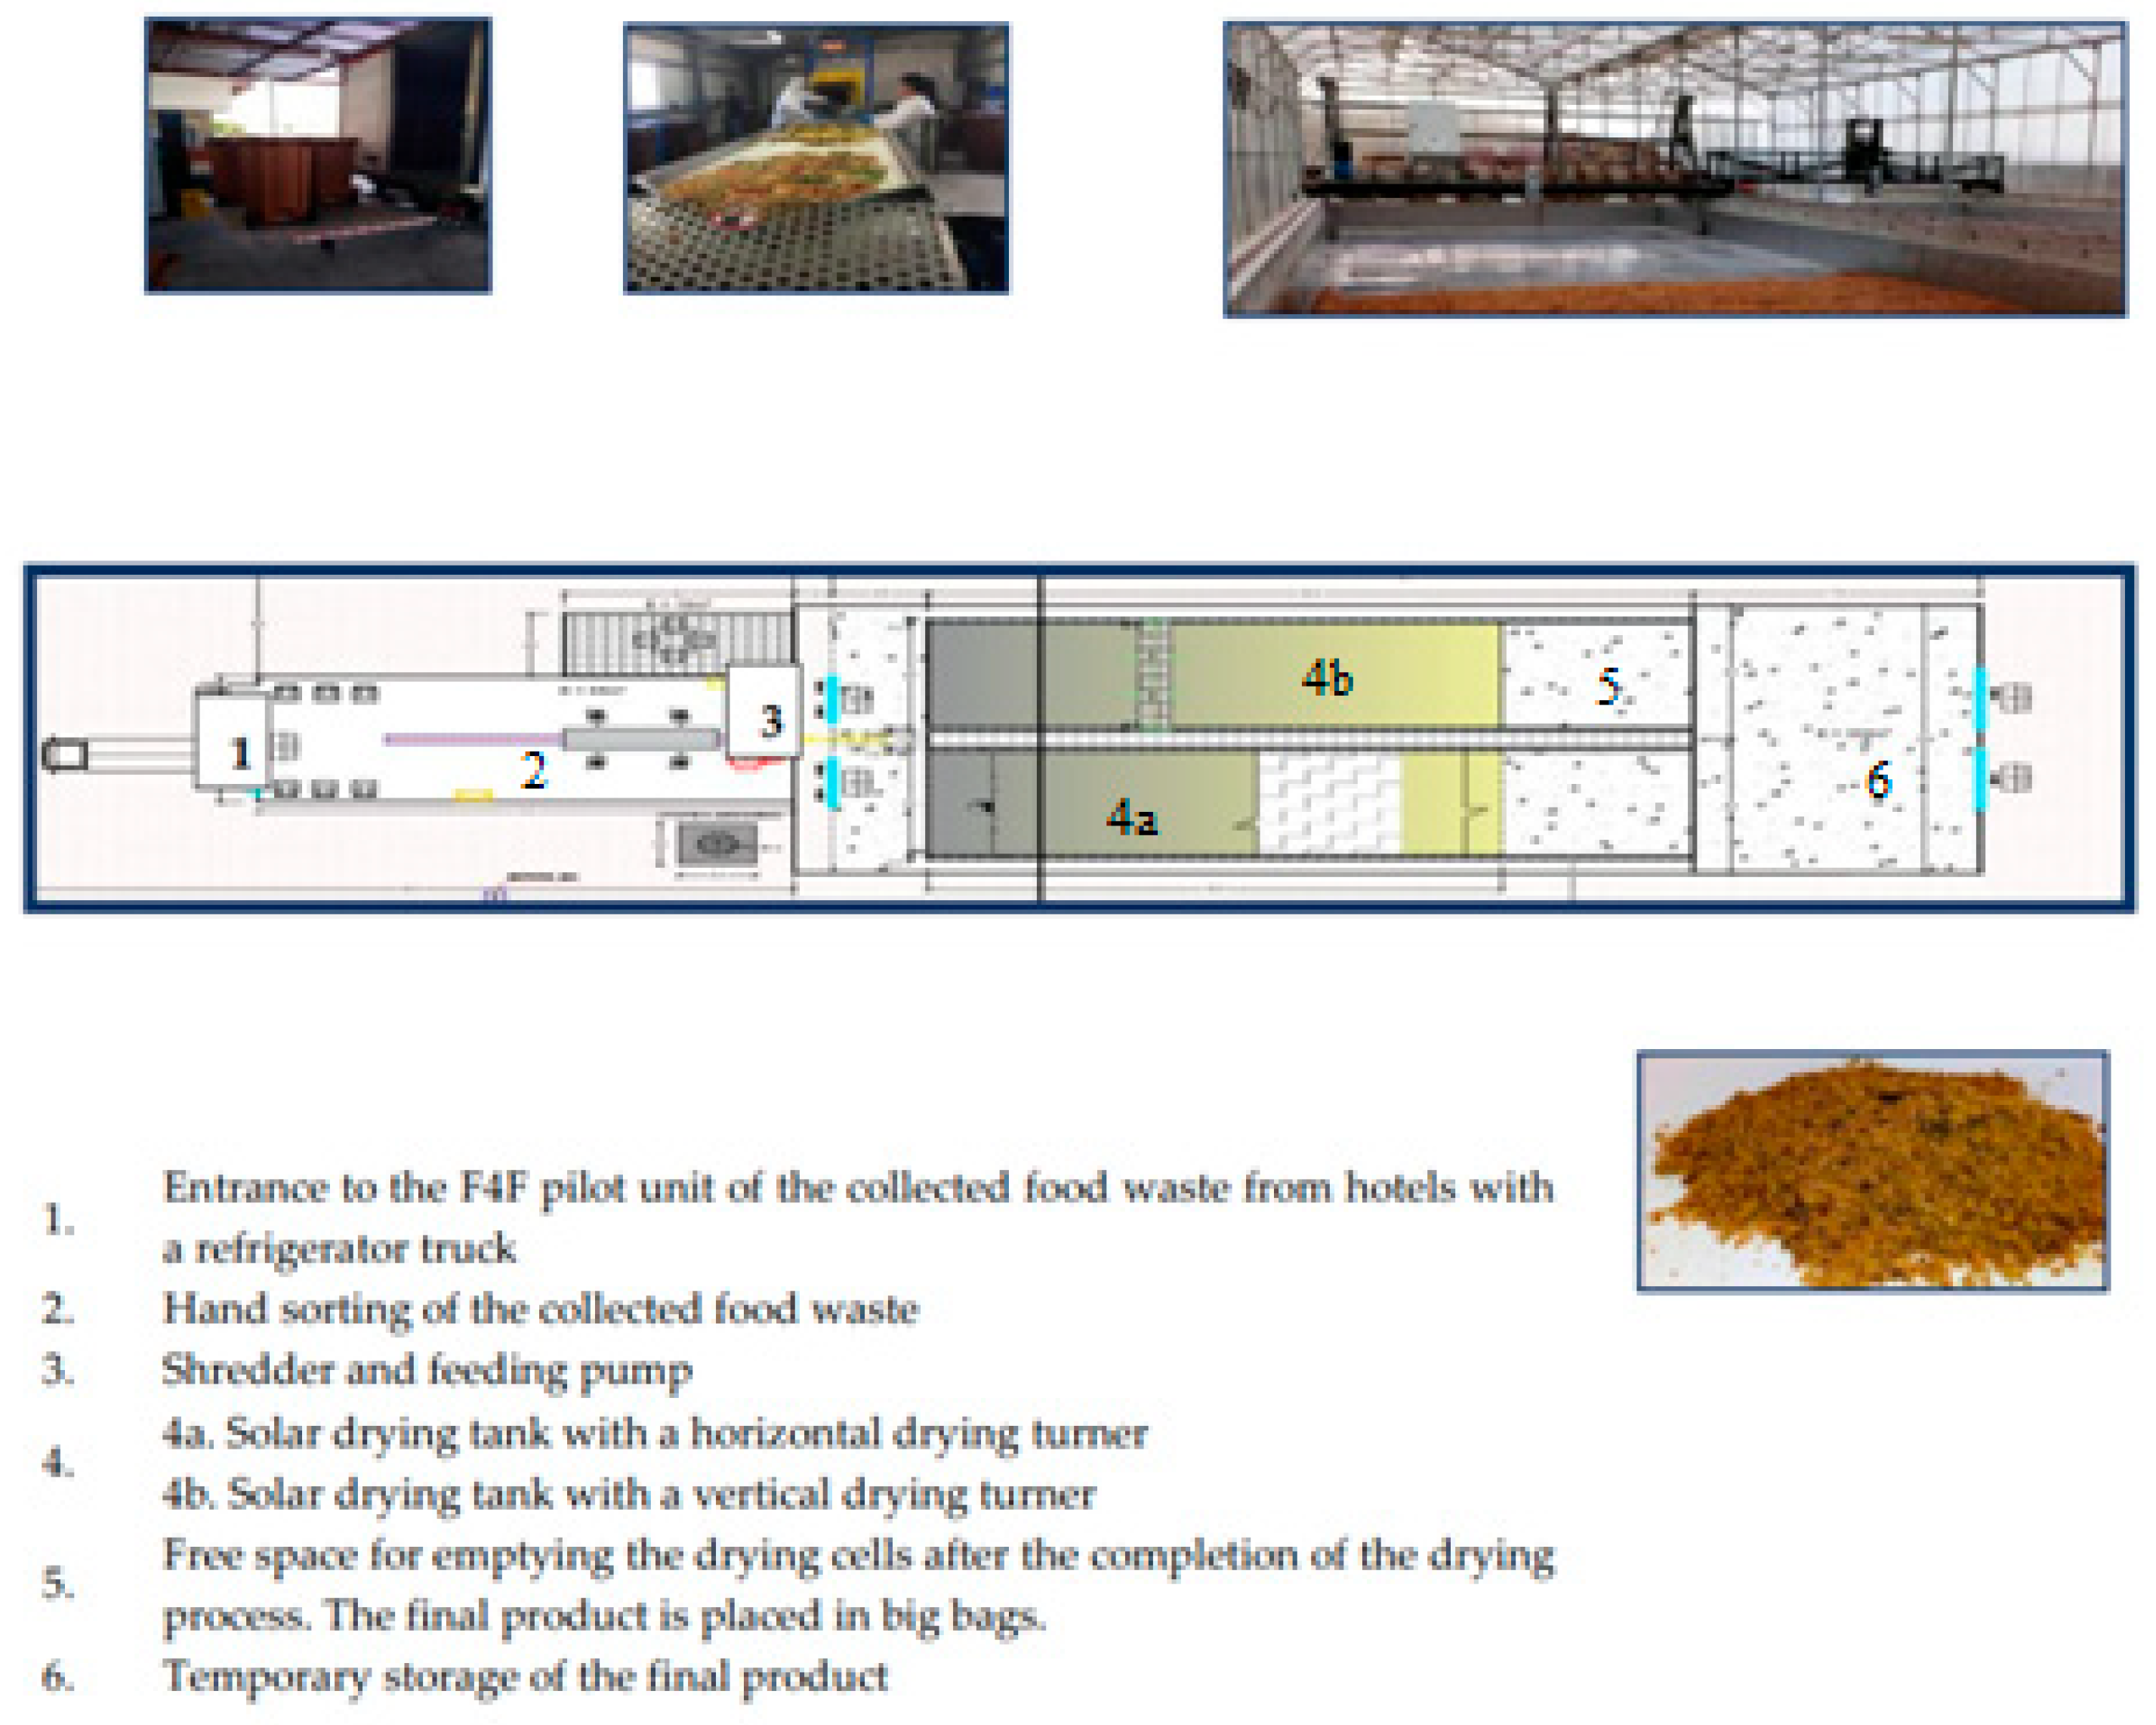 Resources | Free Full-Text | Environmental Impact Assessment of a Solar  Drying Unit for the Transformation of Food Waste into Animal Feed